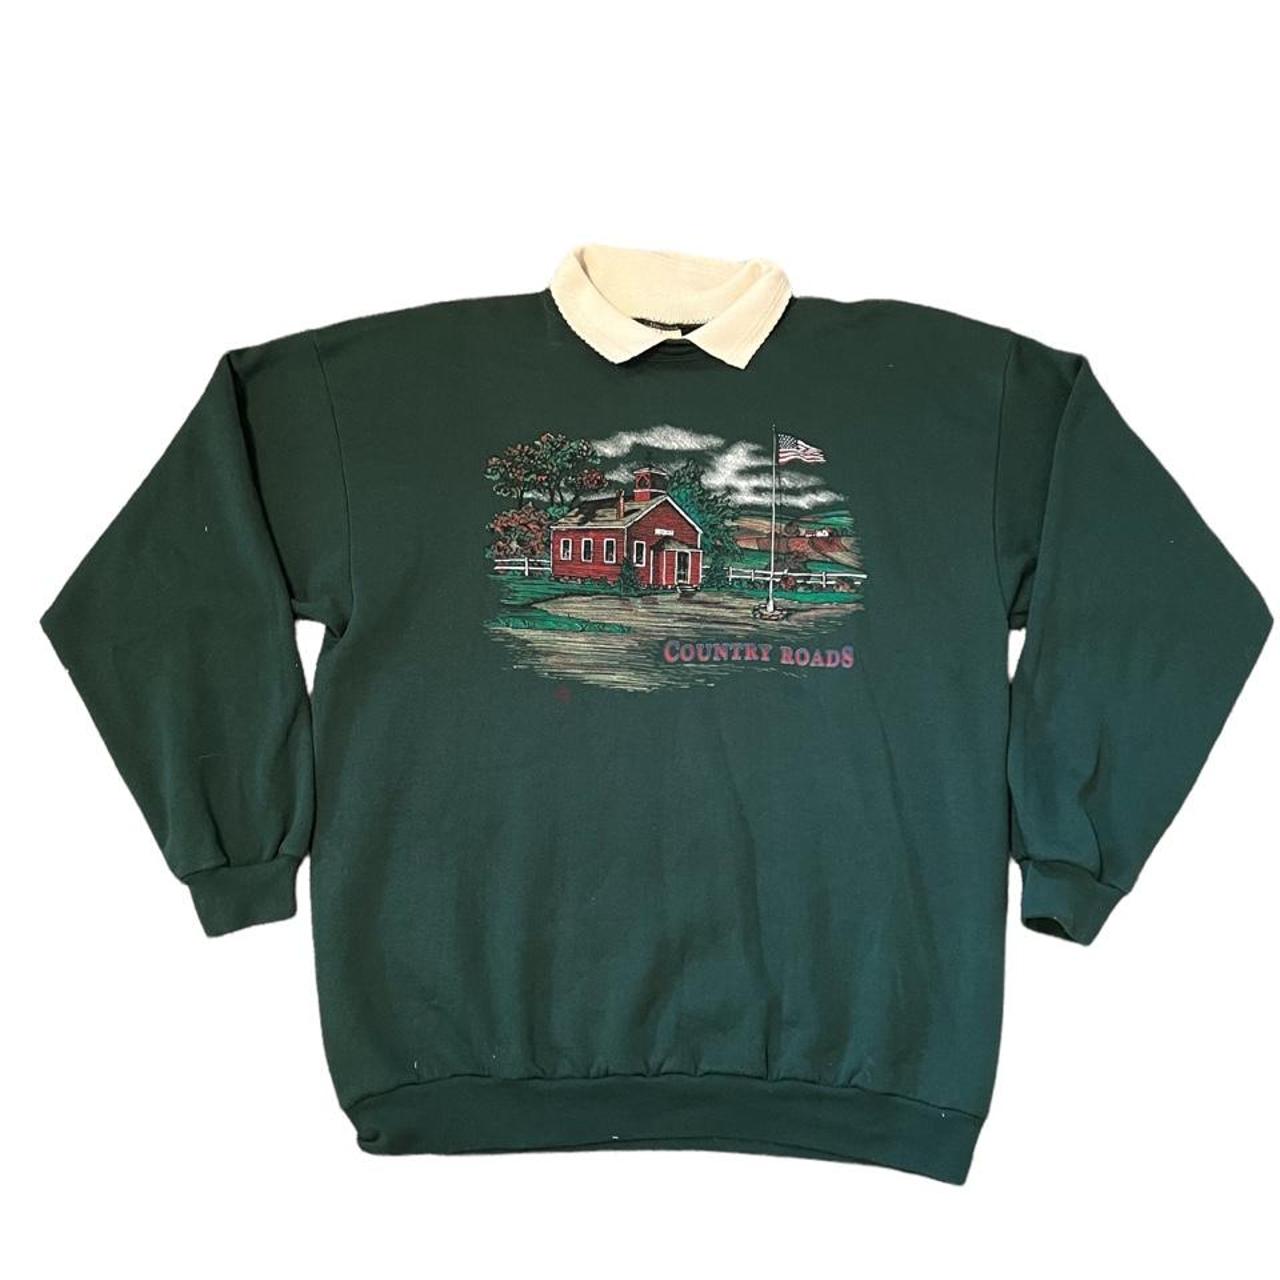 Product Image 1 - Vintage Crewneck

“Country Roads”
Collared 
Cotton Traders